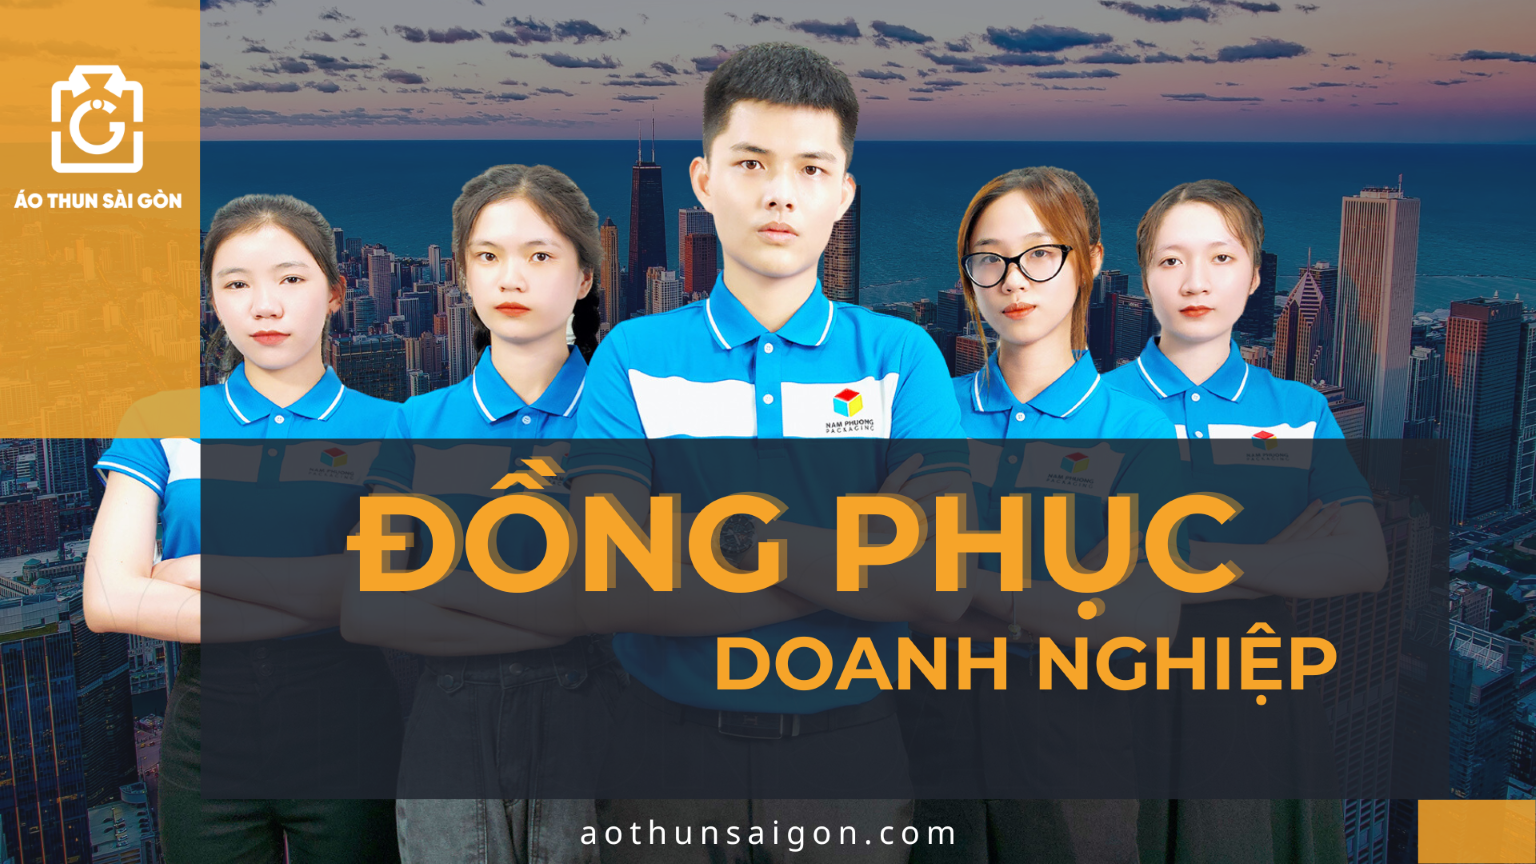 Cac mau dong phuc an tuong 2023 - Video Gallery